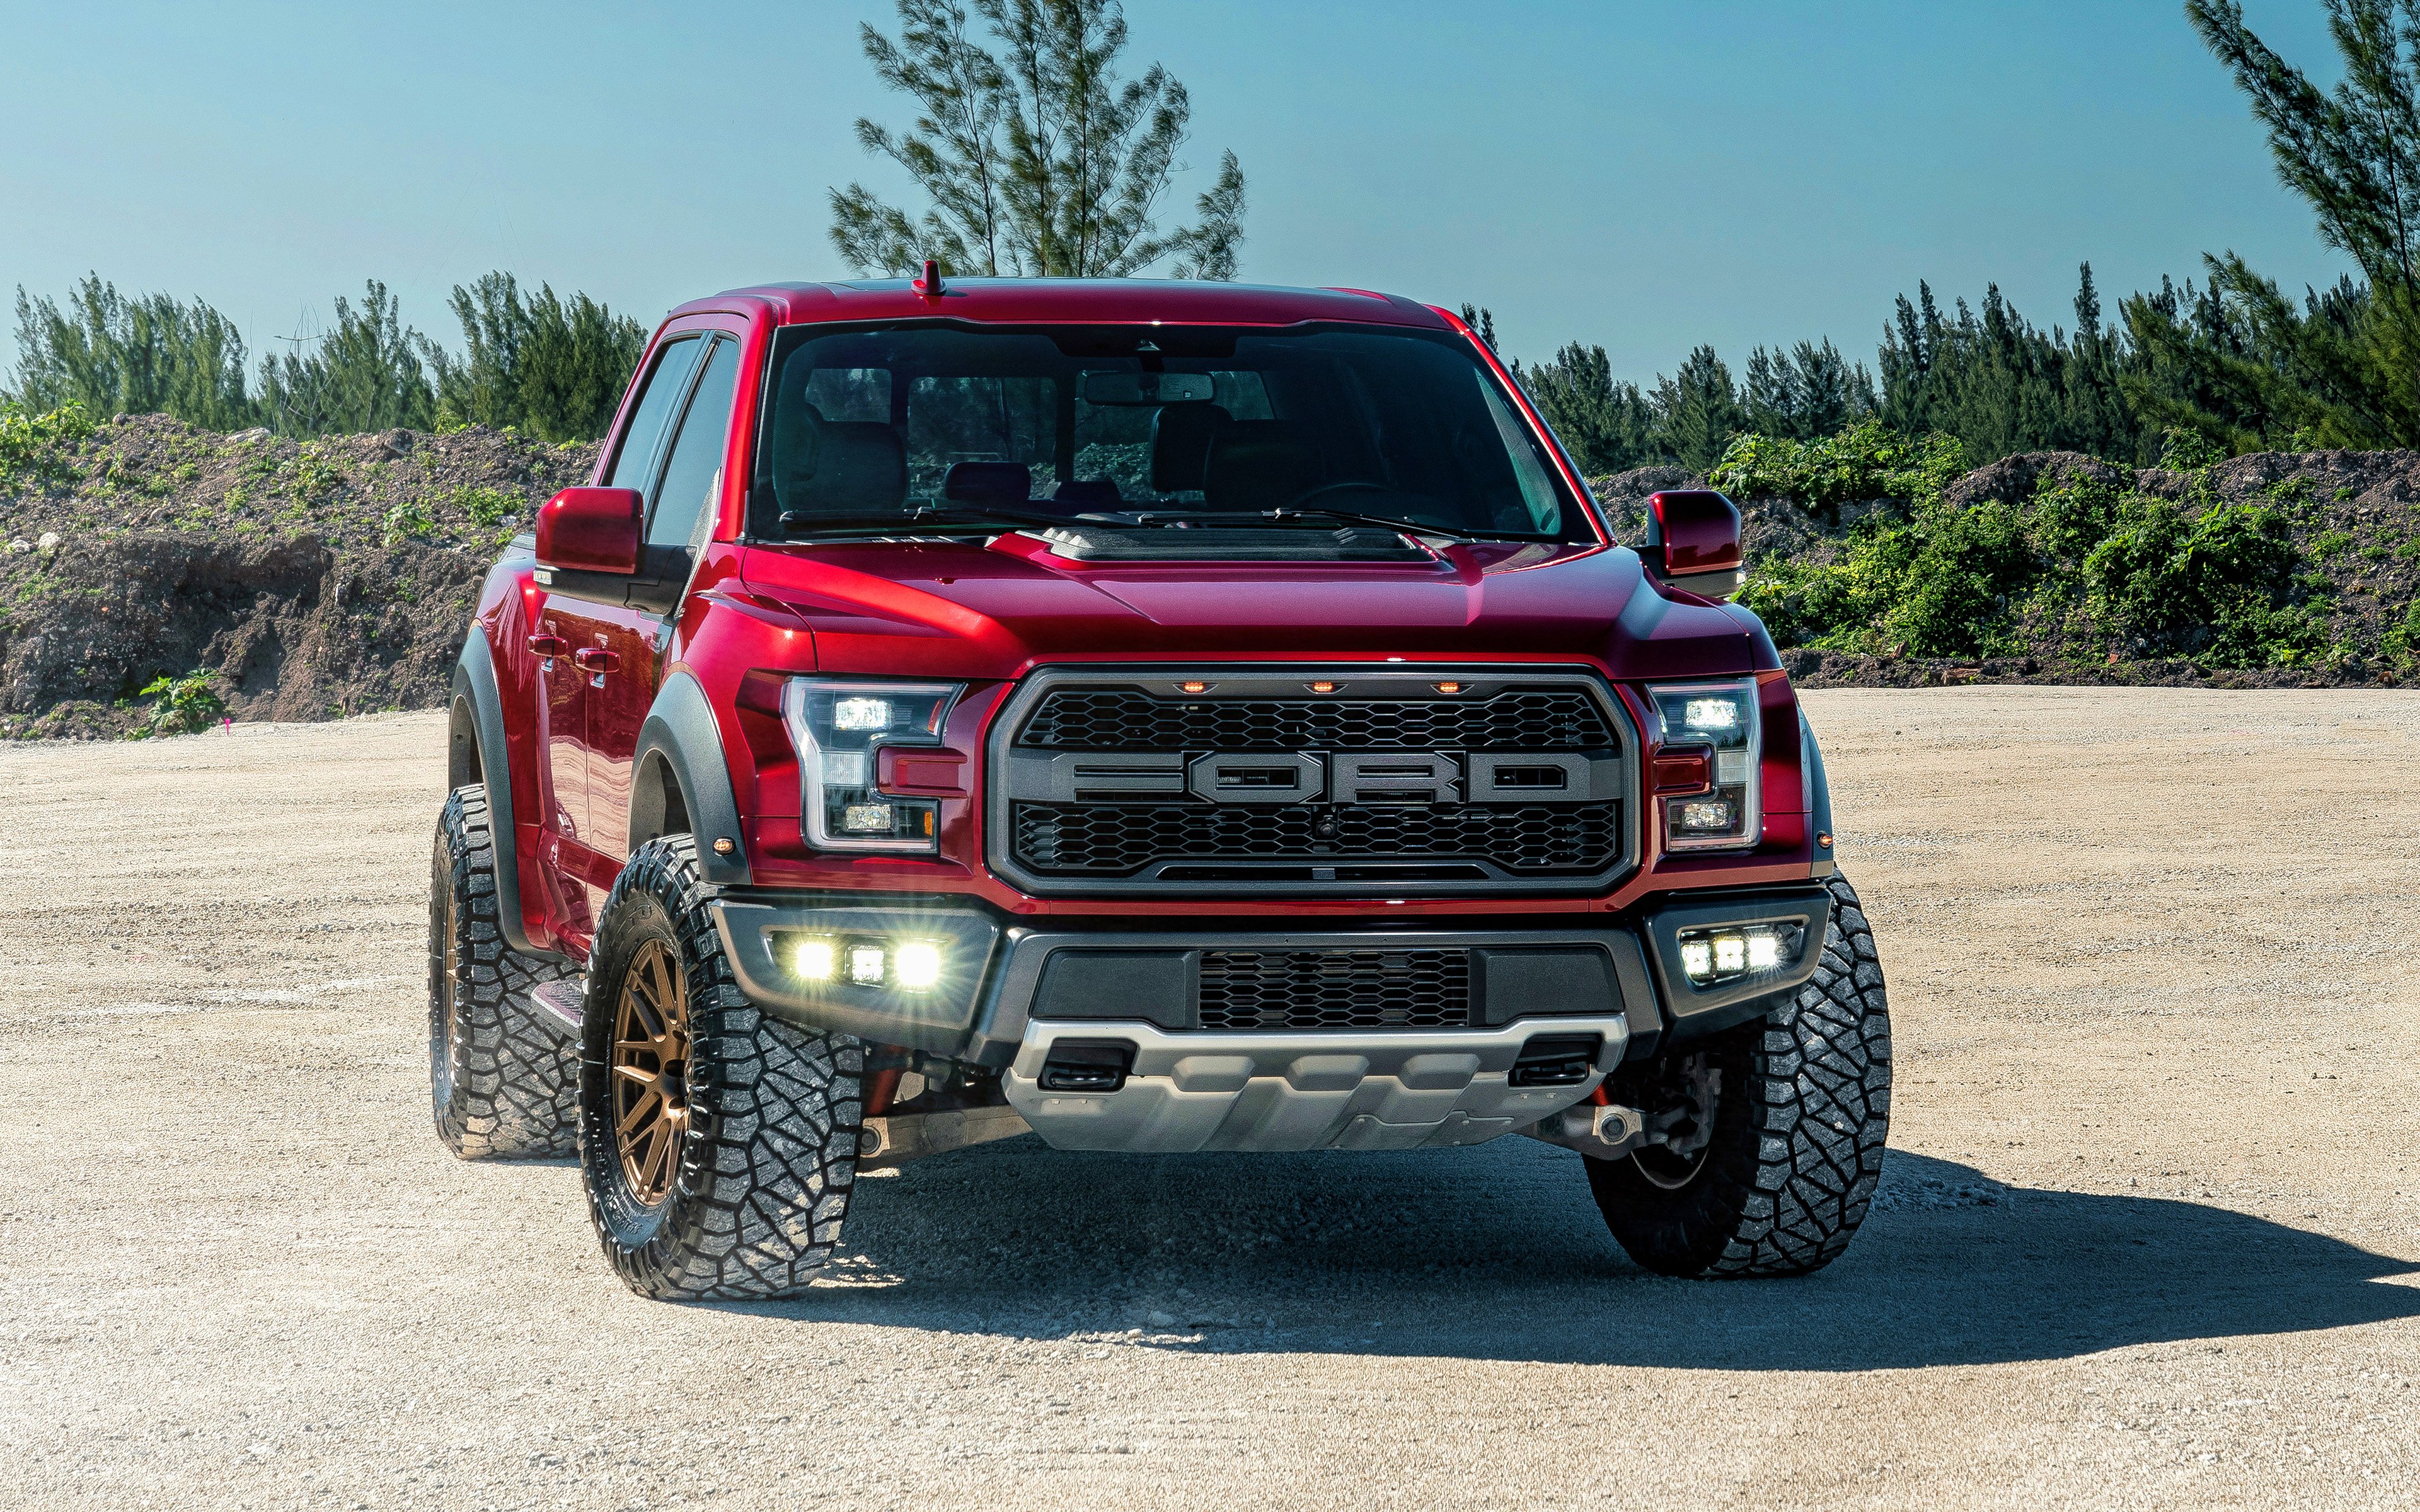 Download Wallpaper Ford F 150 Raptor, 4k, Offroad, 2020 Cars, SUVs, American Cars, 2020 Ford F 150 Raptor, Ford For Desktop With Resolution 3840x2400. High Quality HD Picture Wallpaper